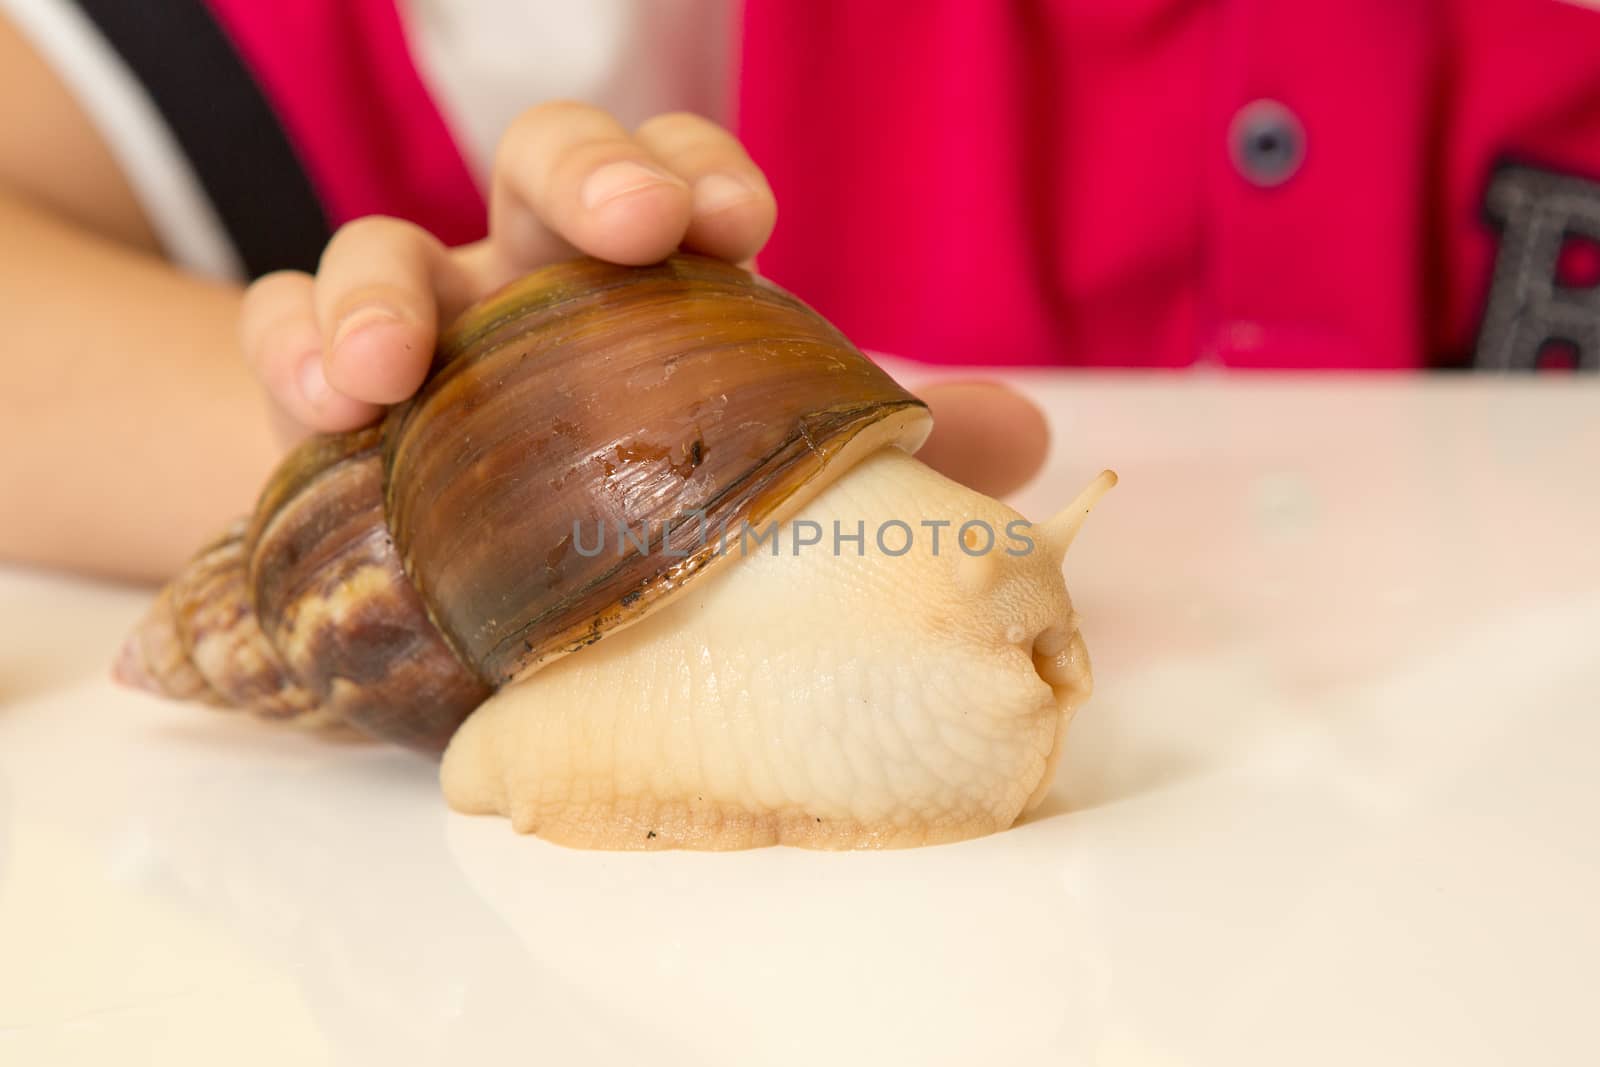 Achatina snail in hand at home, close up